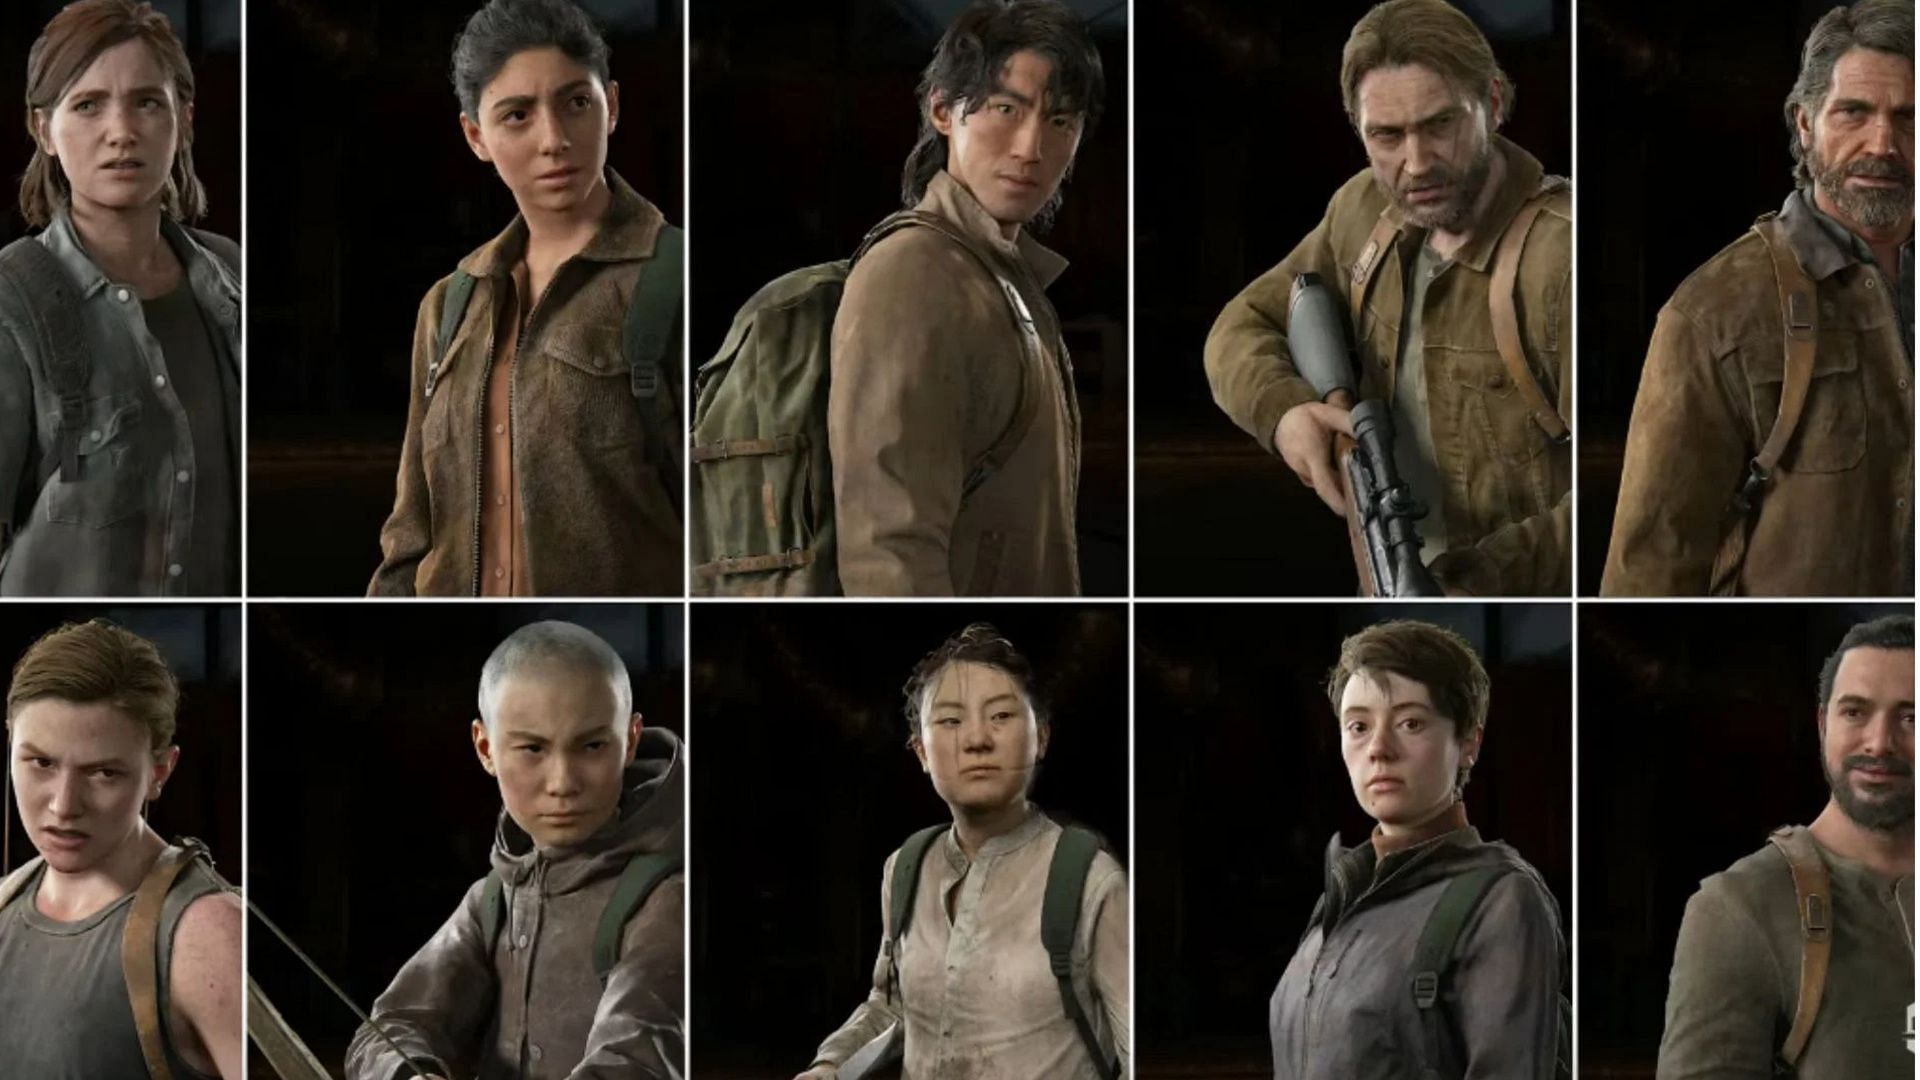 Playable characters in The Last of Us Part 2 No Return. (Image via Naughty Dog)